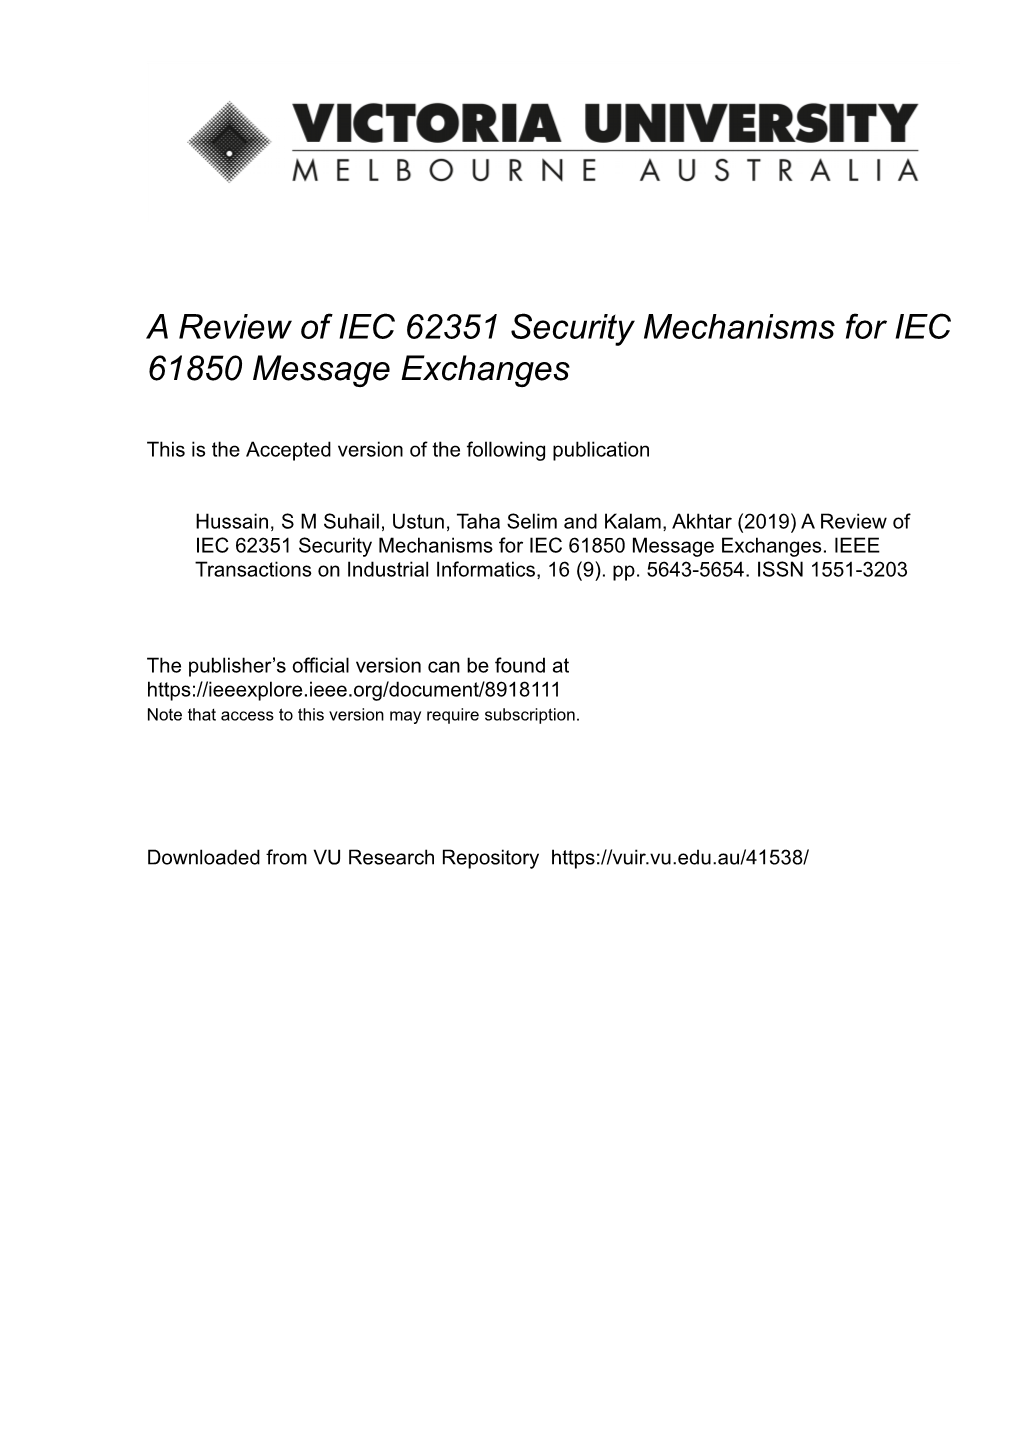 A Review of IEC 62351 Security Mechanisms for IEC 61850 Message Exchanges